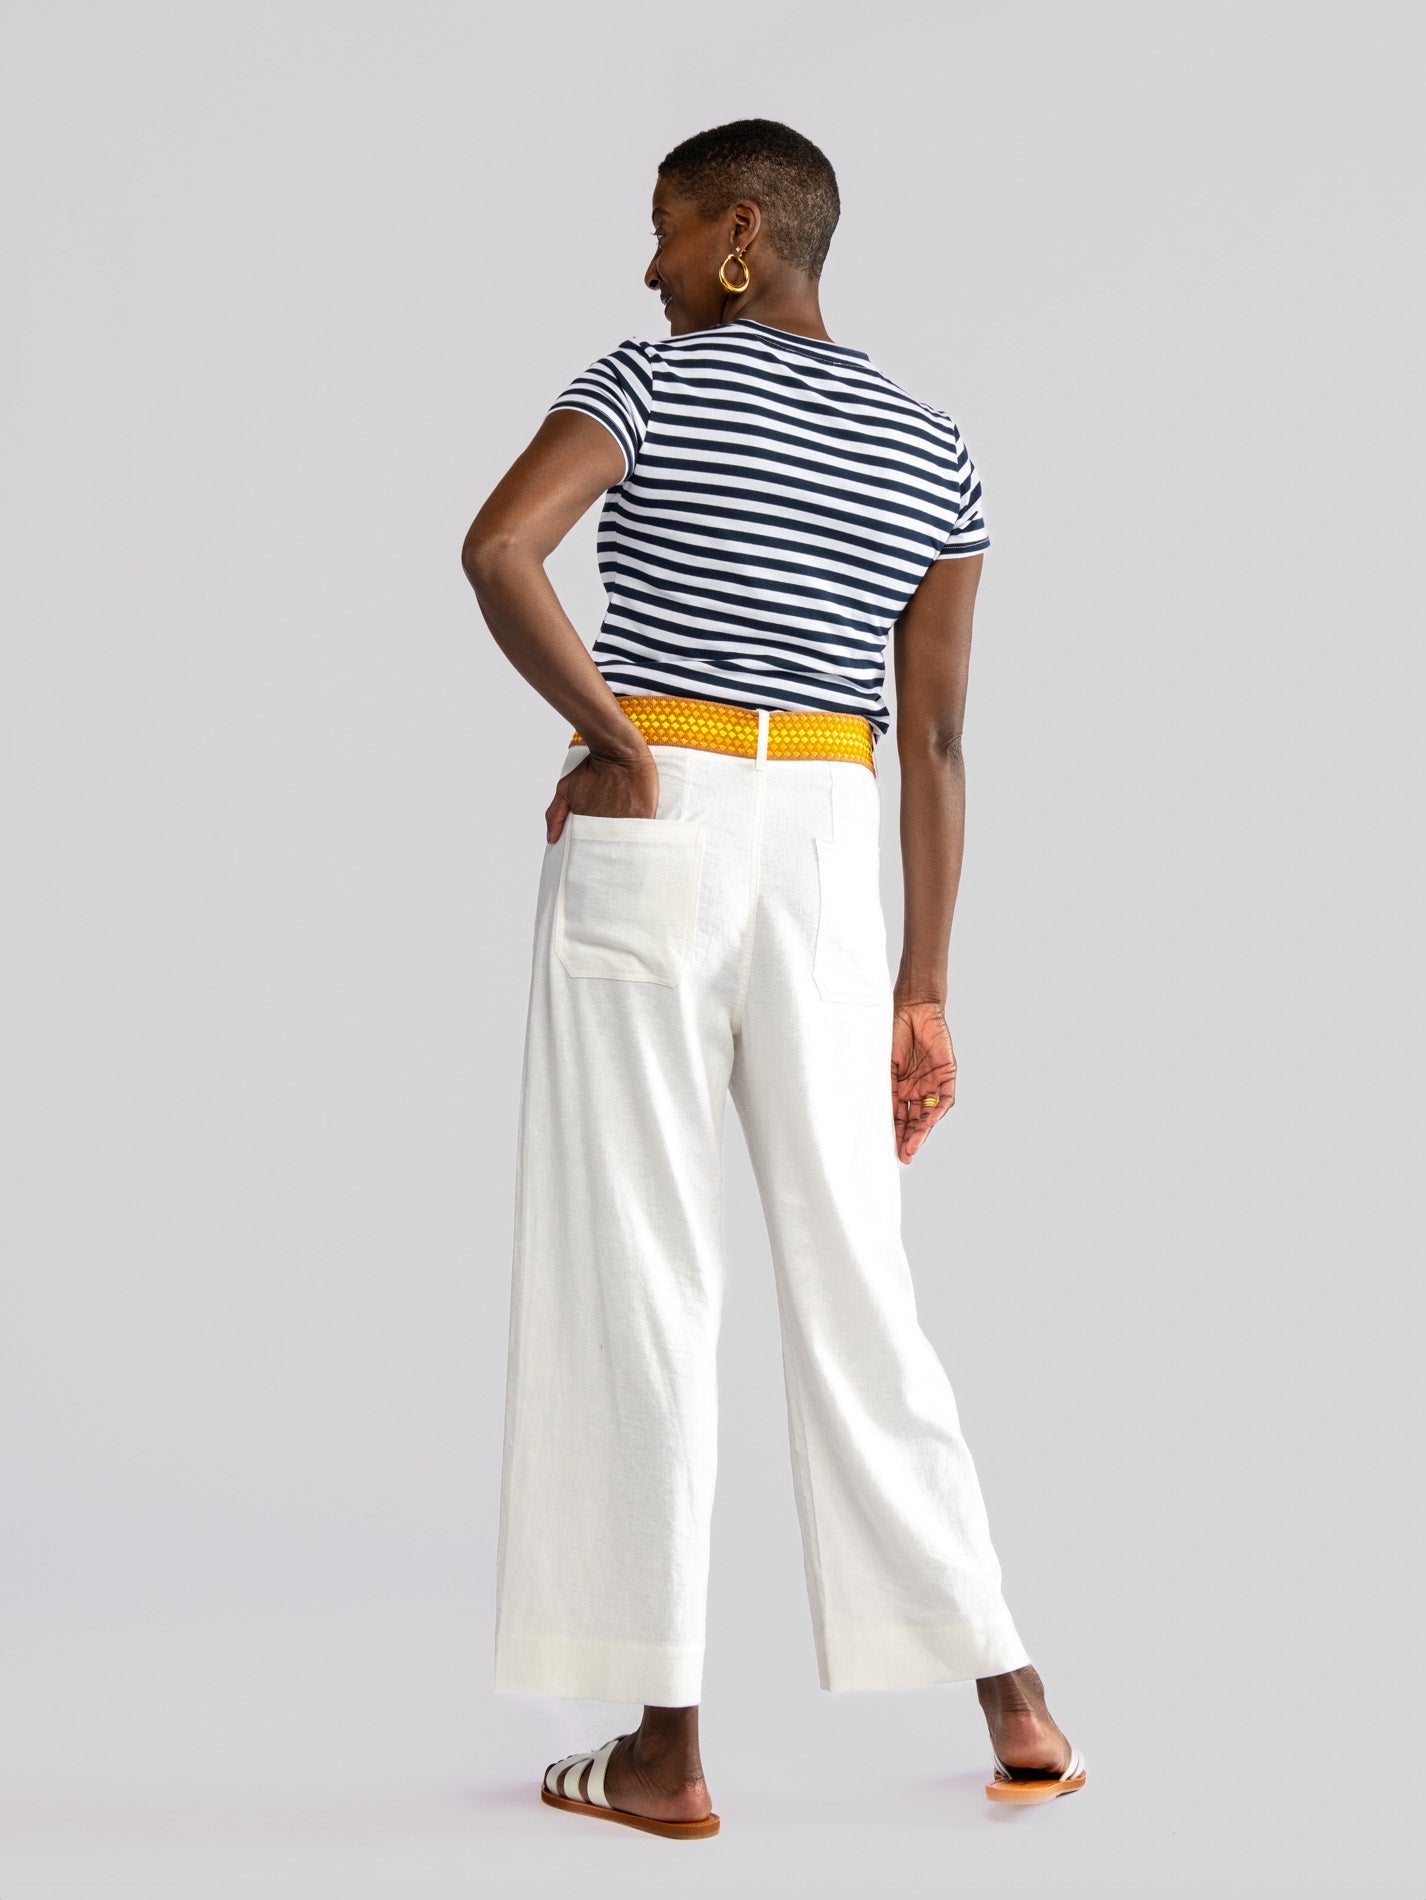 NELLIE tee Dark Navy and White Stripe - Lesley Evers-Shop-Shop/All Products-Shop/Dresses